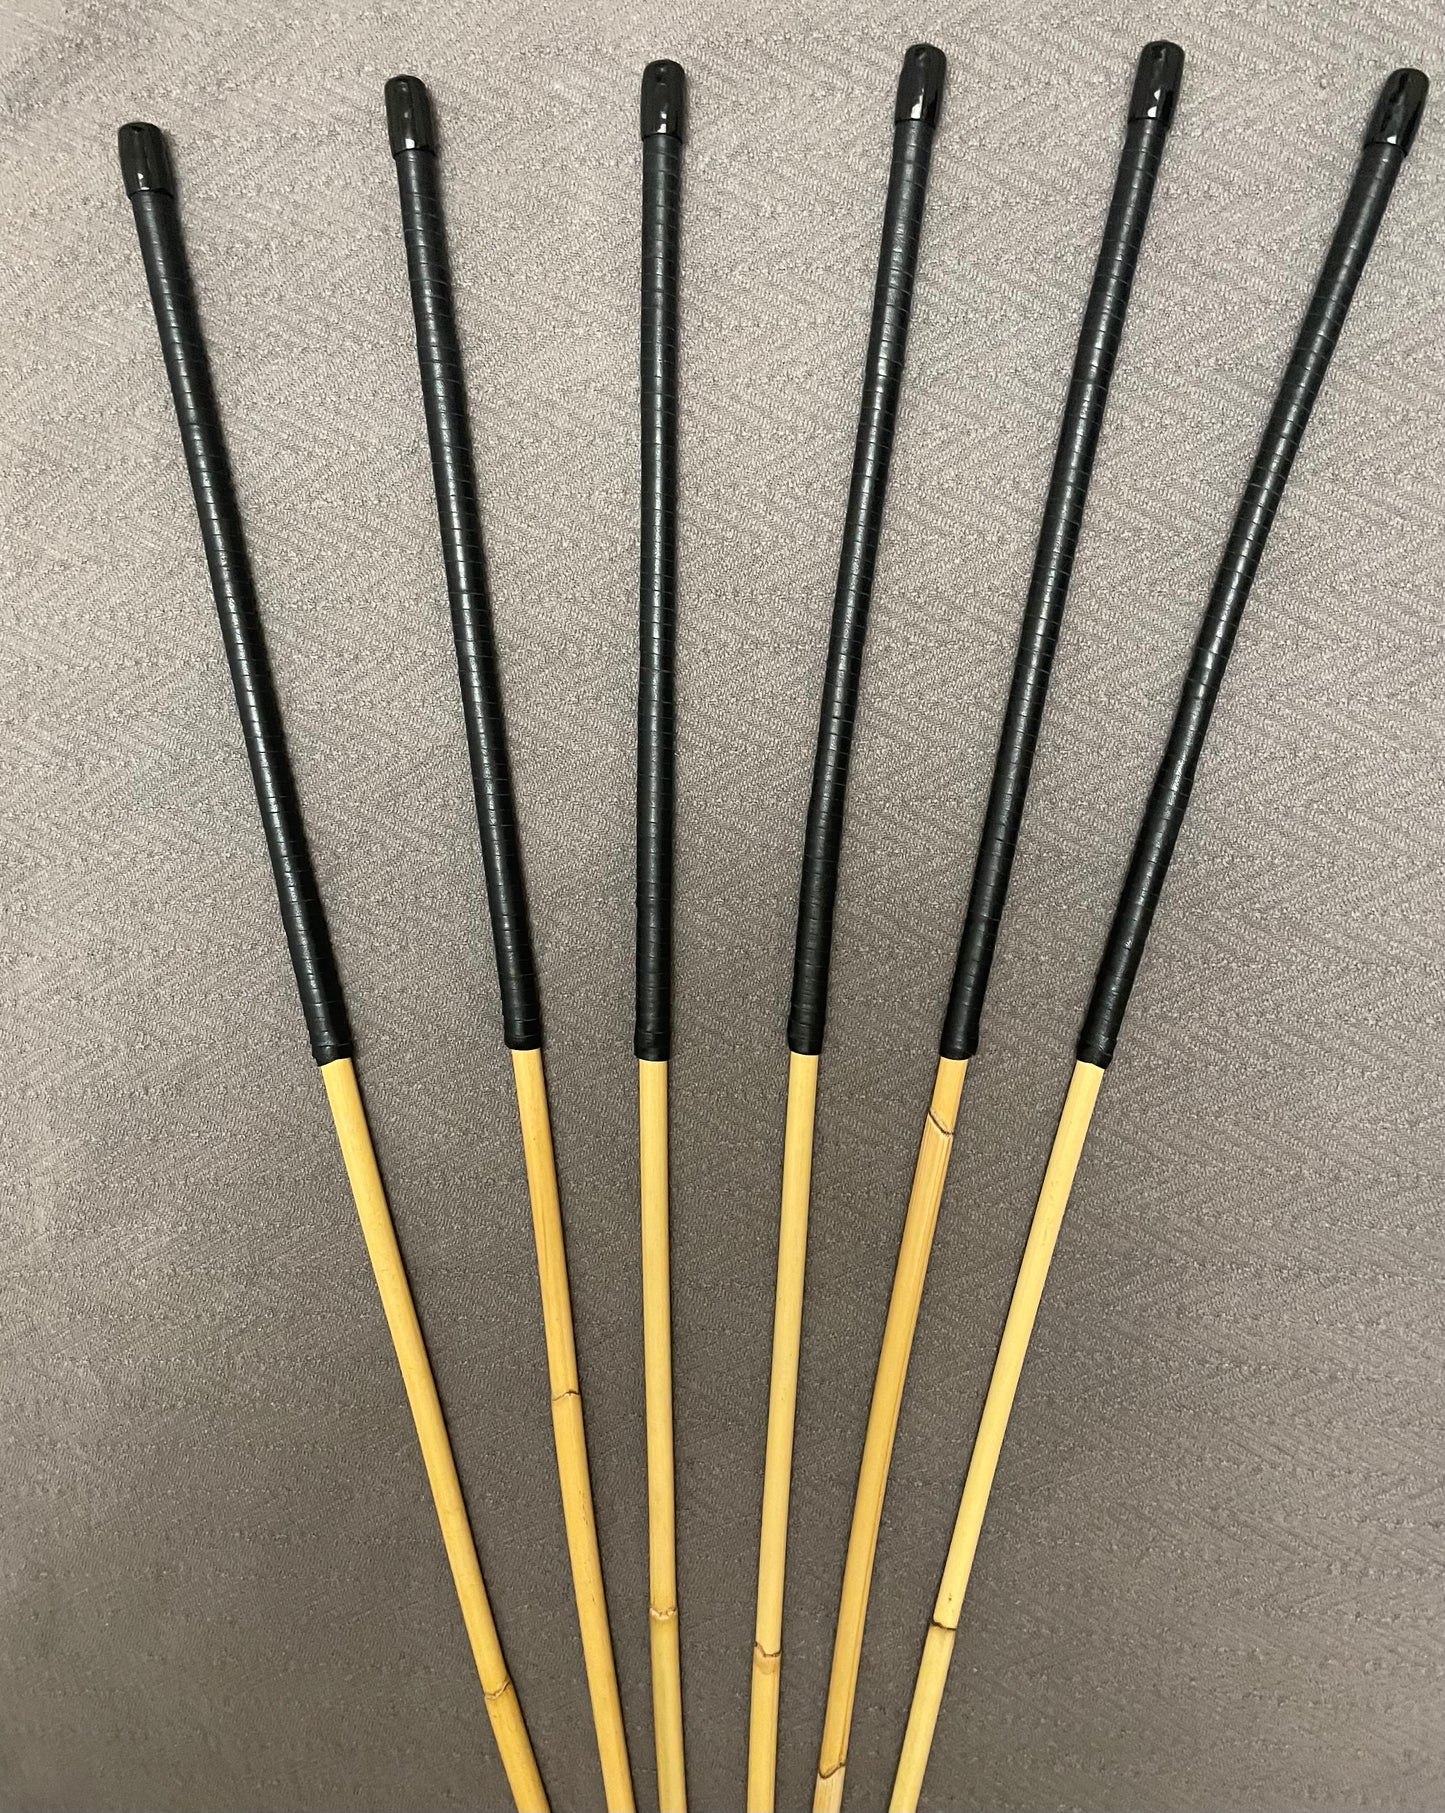 Thick and Thuddy ProDomme Dragon Cane Set of 6 Rattan Canes / Whipping Canes / BDSM Canes - 95 cms Length - Black Kangaroo Leather Handles